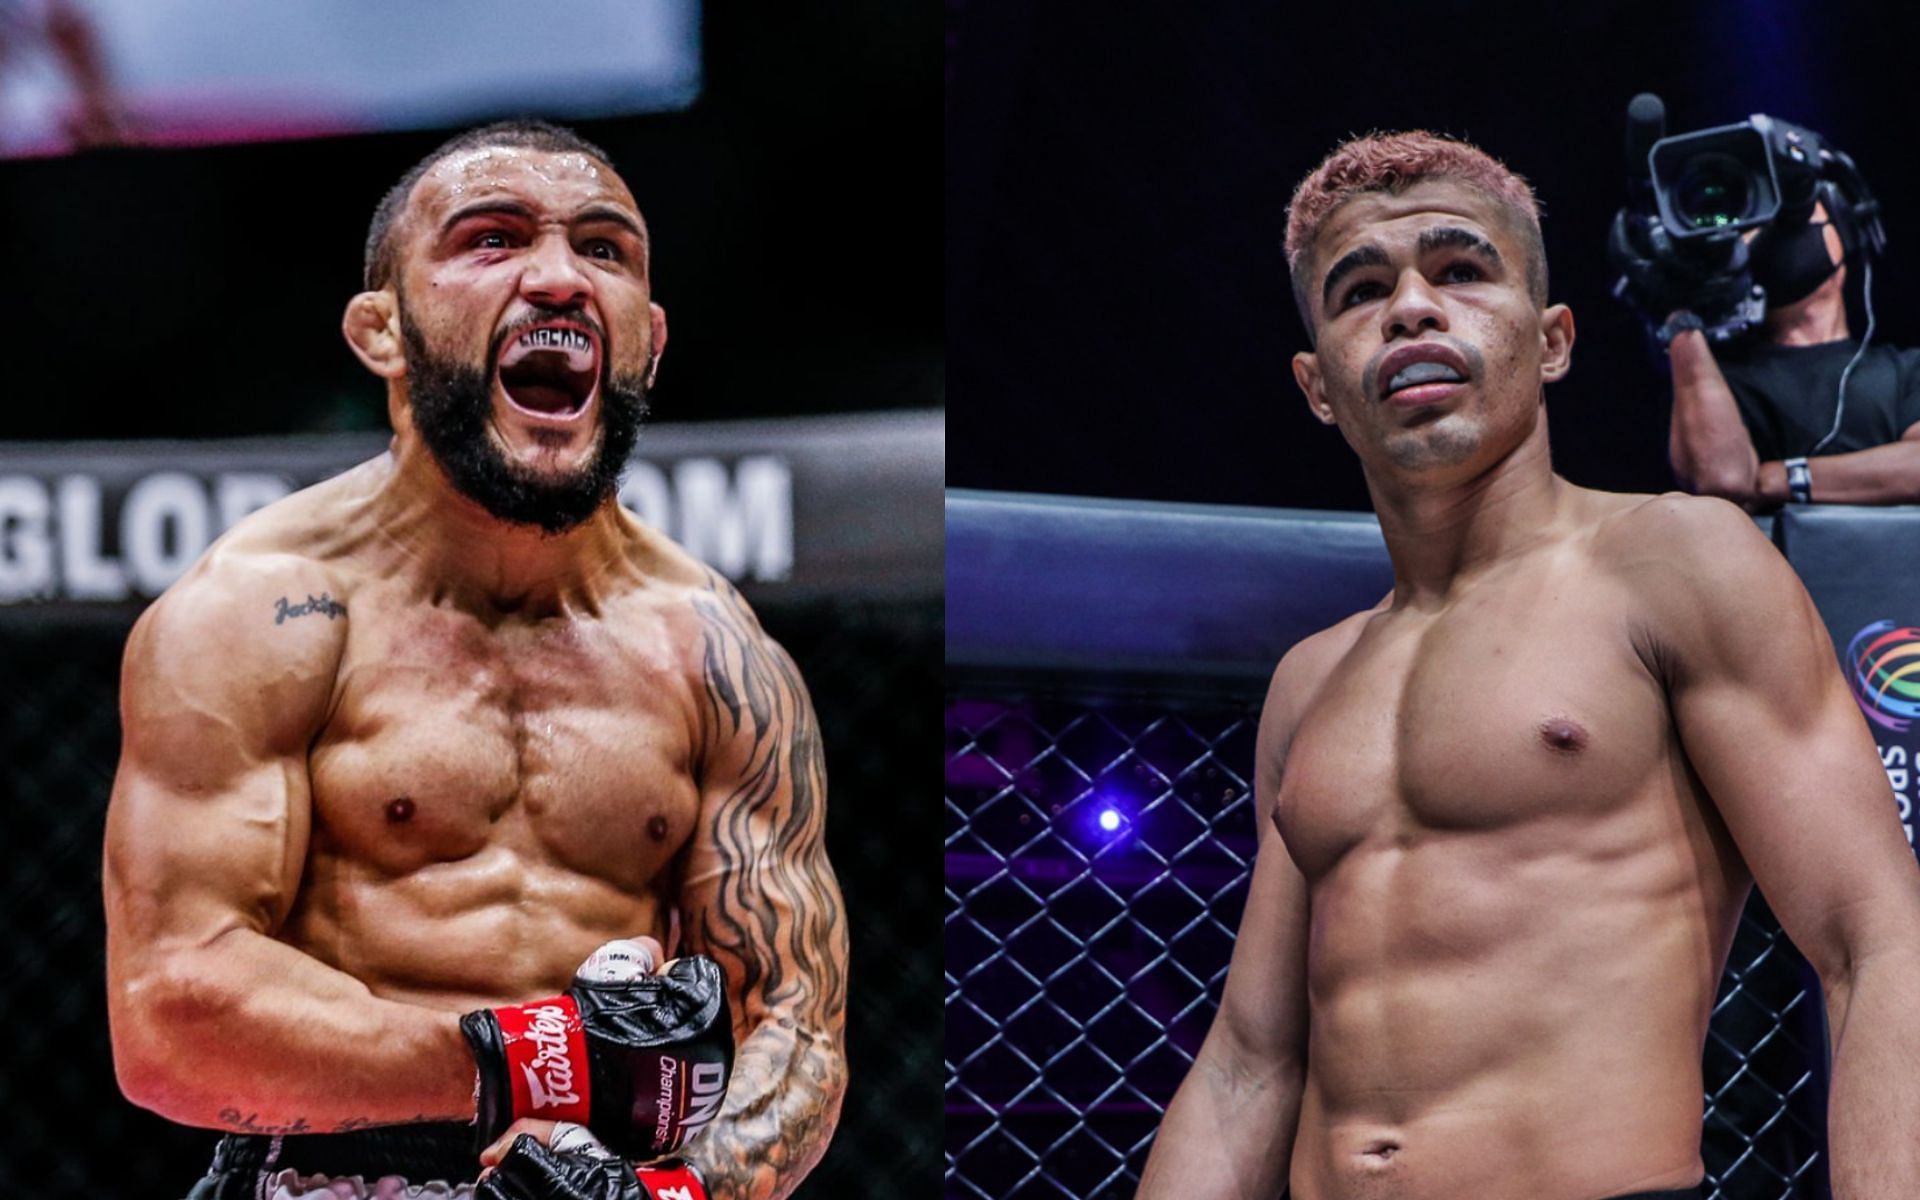 Fabricio Andrade (right) wants an emphatic win if he takes on John Lineker (left). [Photos ONE Championship]